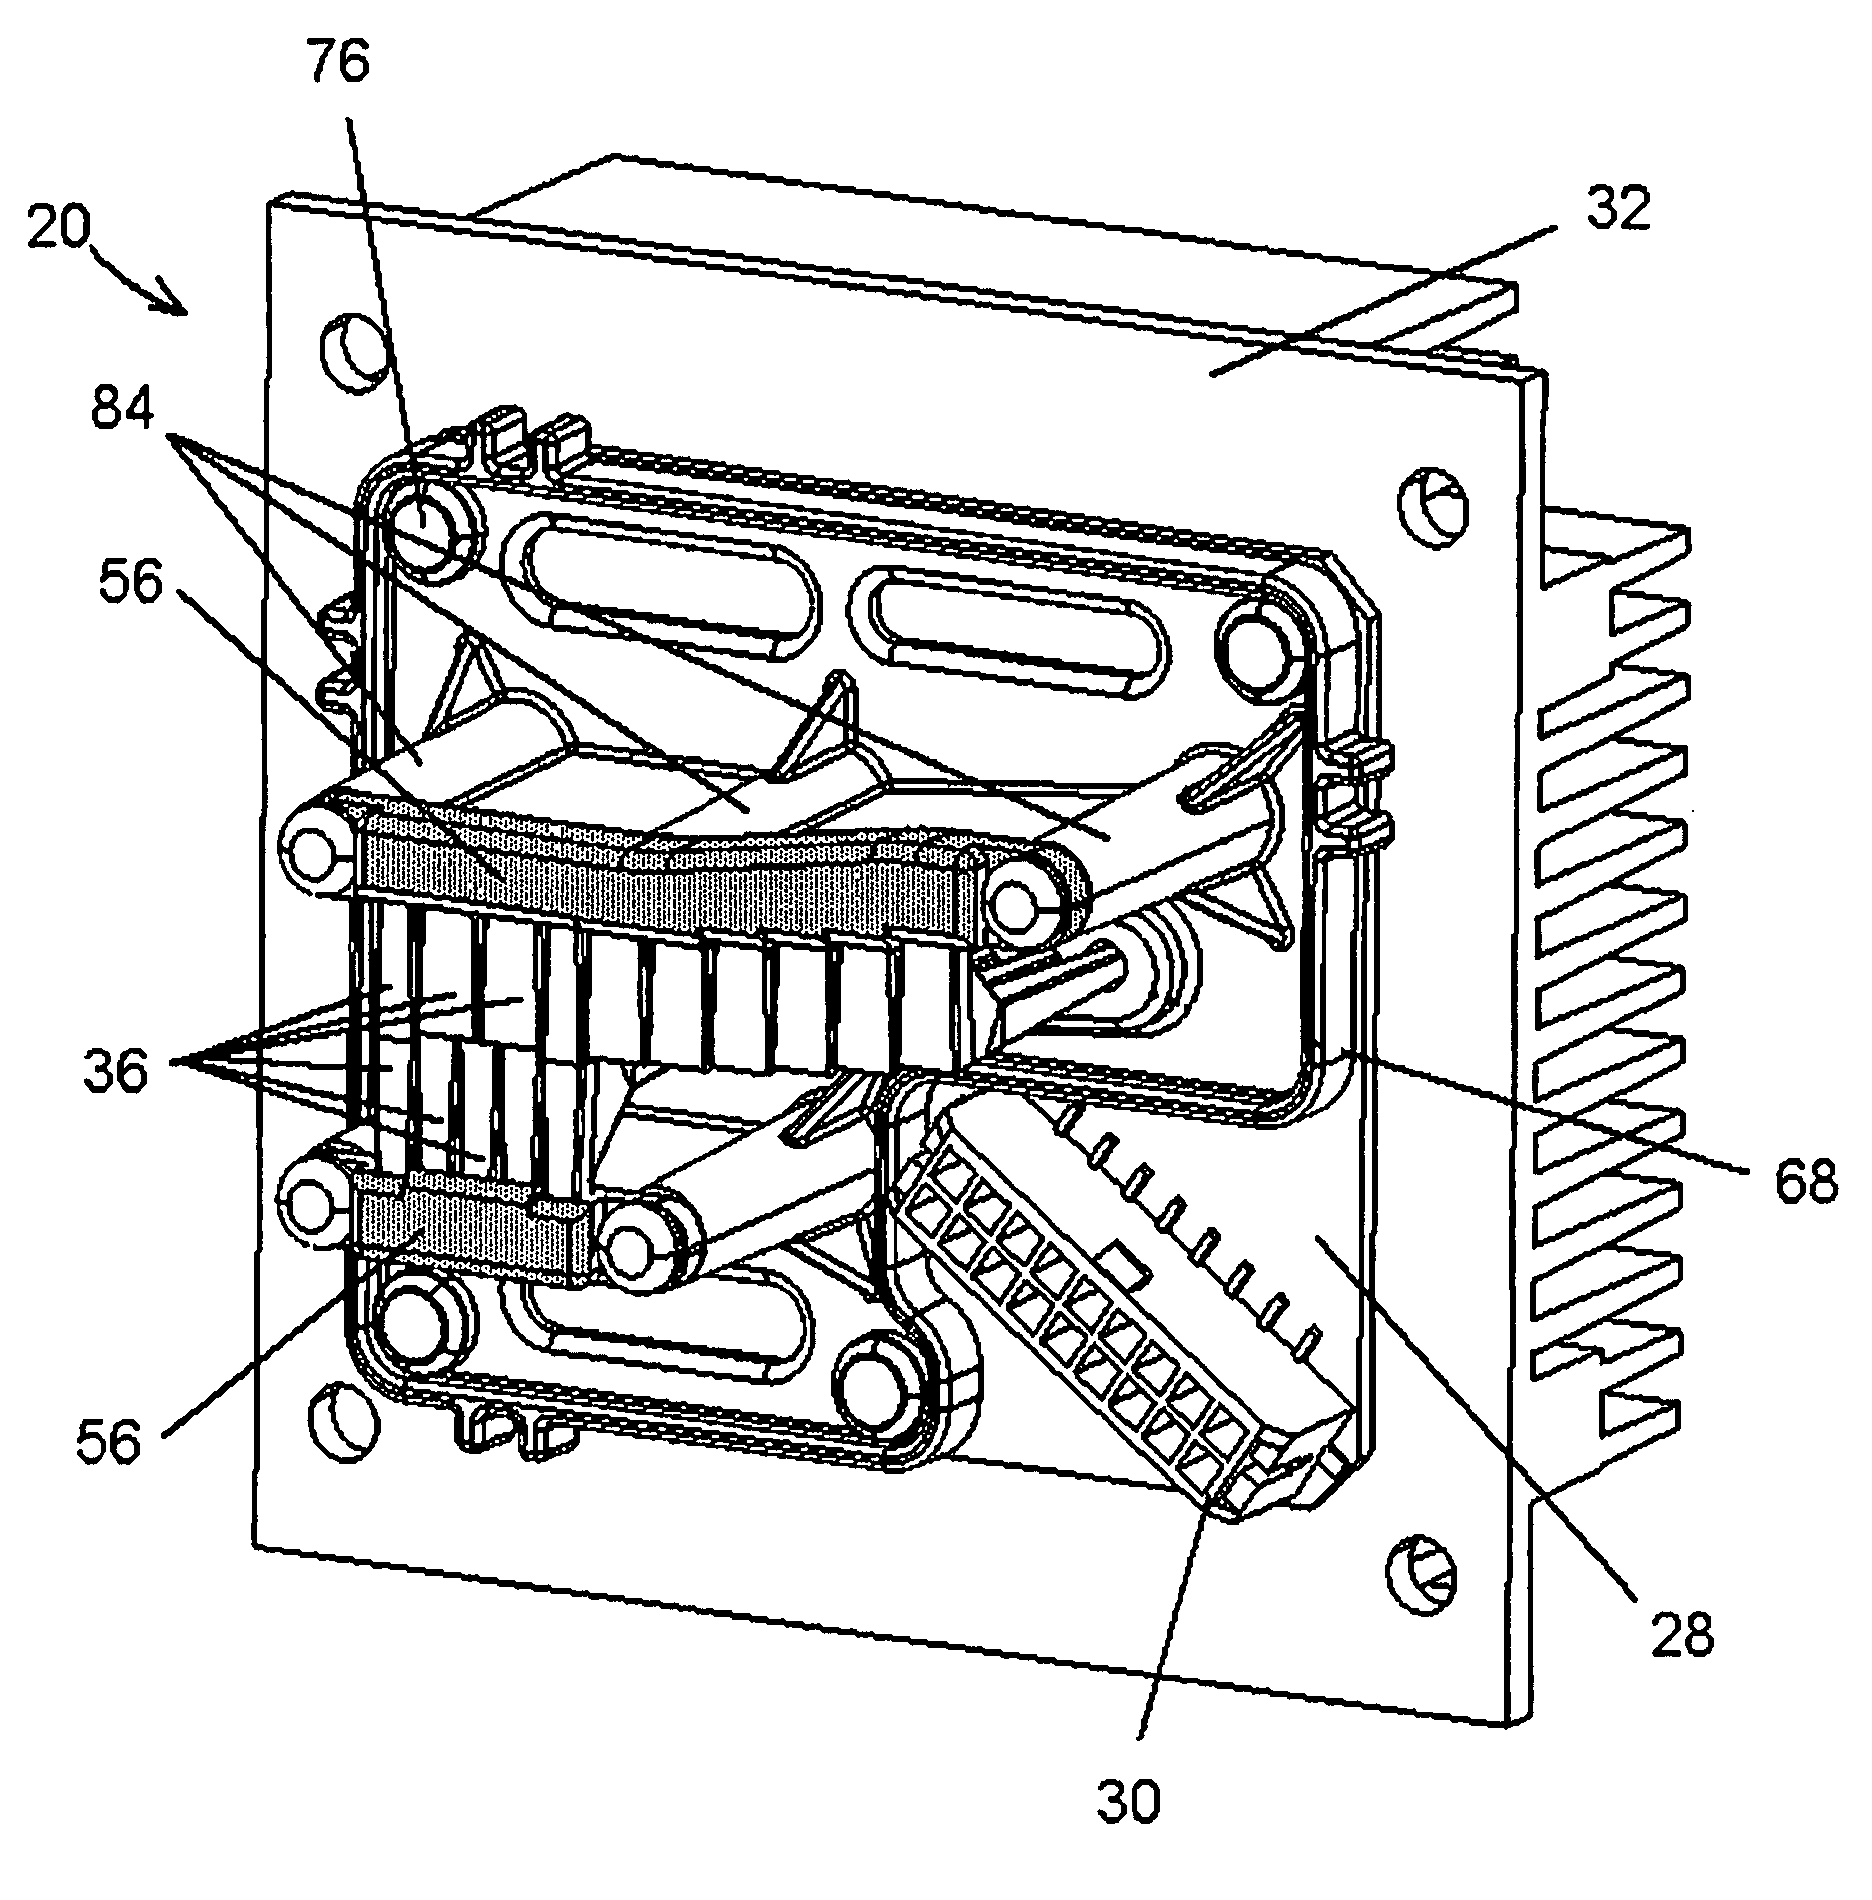 Semiconductor light engine using glass light pipes